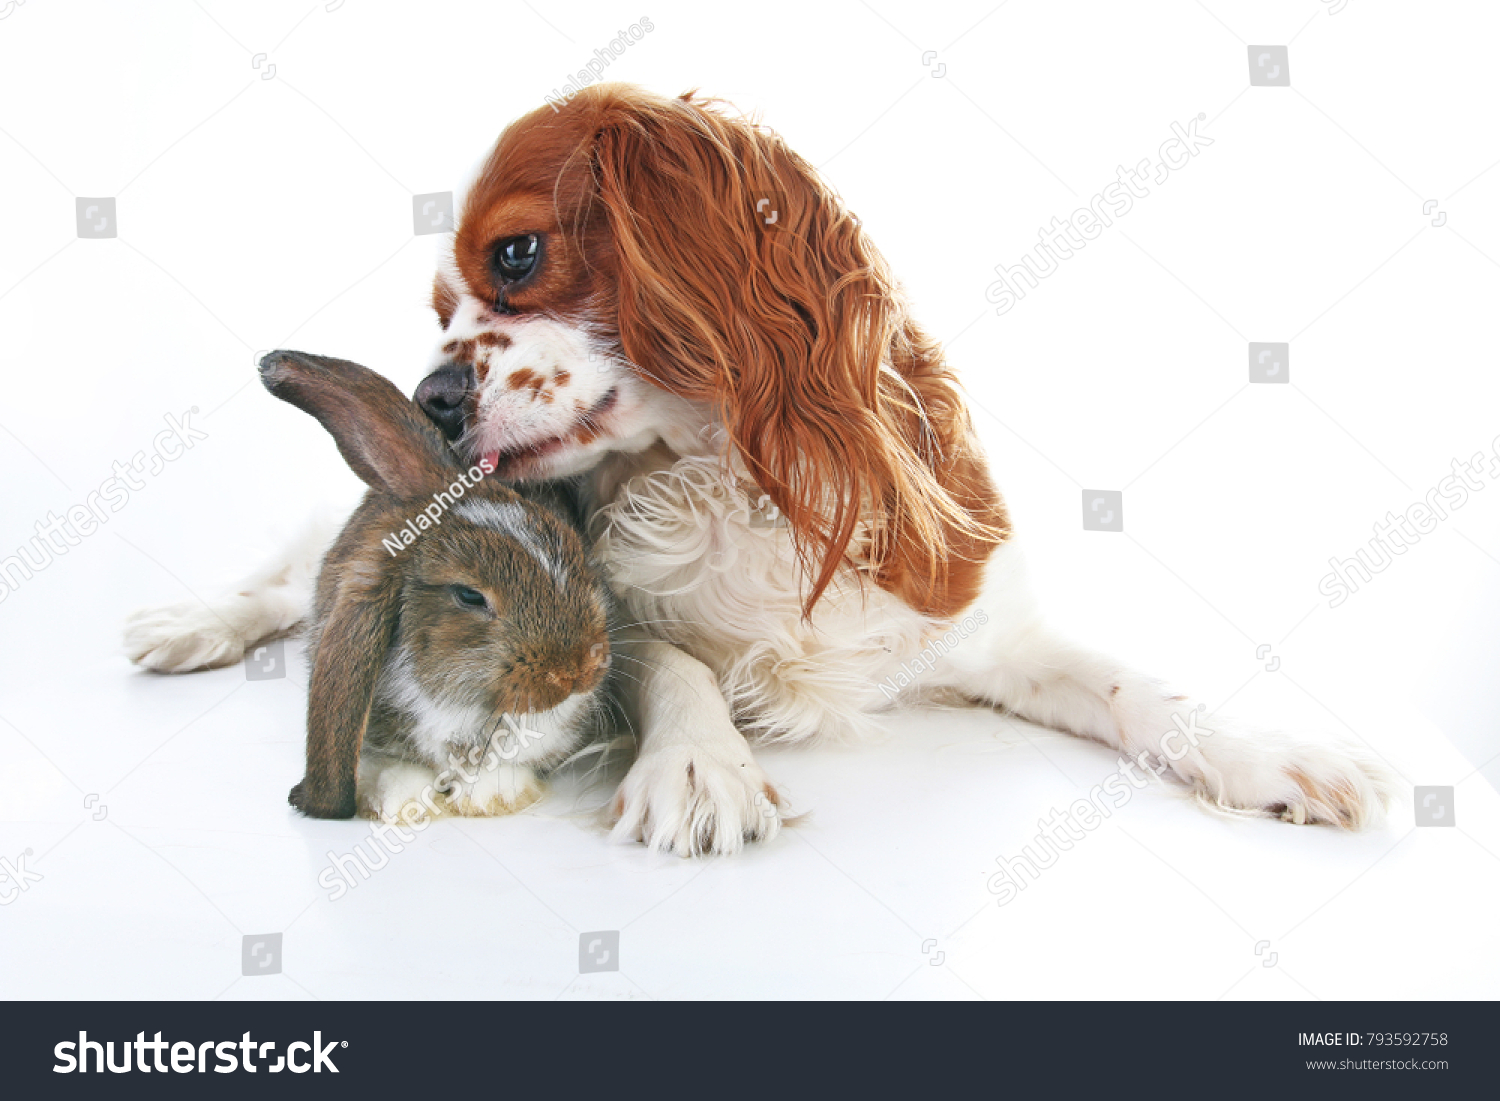 Animal friends. True pet friends. Dog rabbit bunny lop animals together on isolated white studio background. Pets love each other. Cute. #793592758